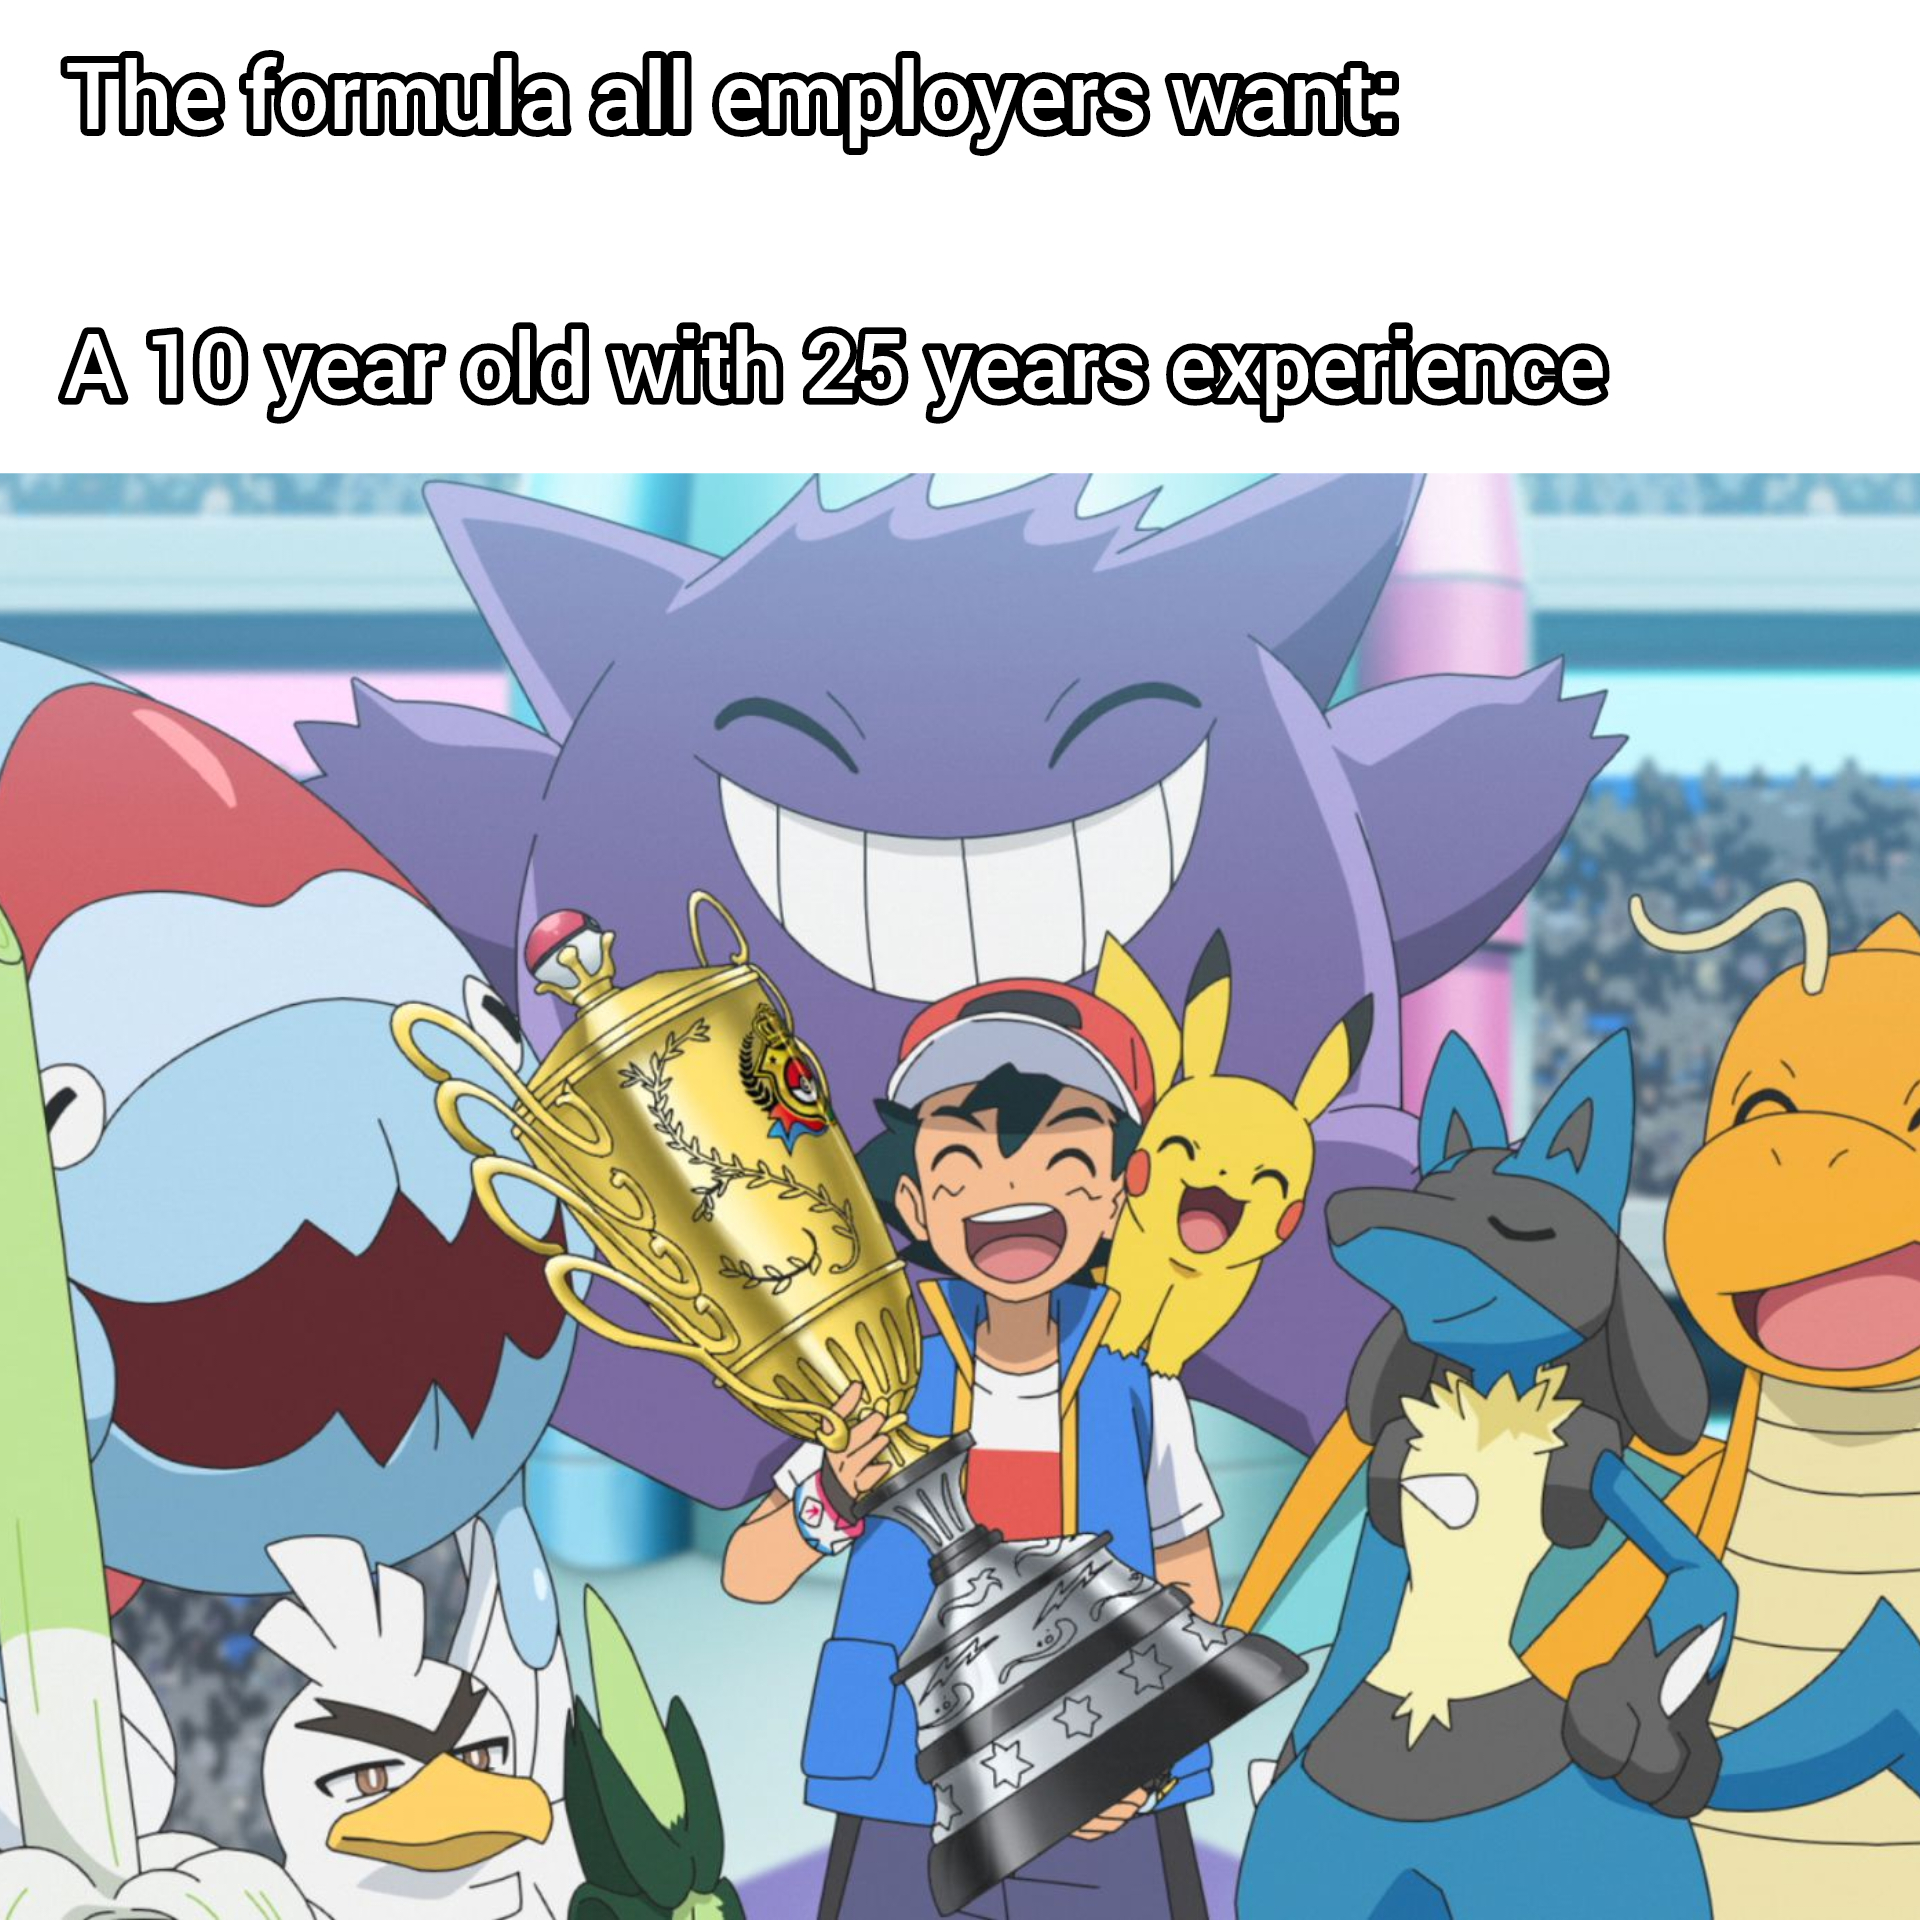 funny memes - Pokémon - The formula all employers want A 10 year old with 25 years experience 3